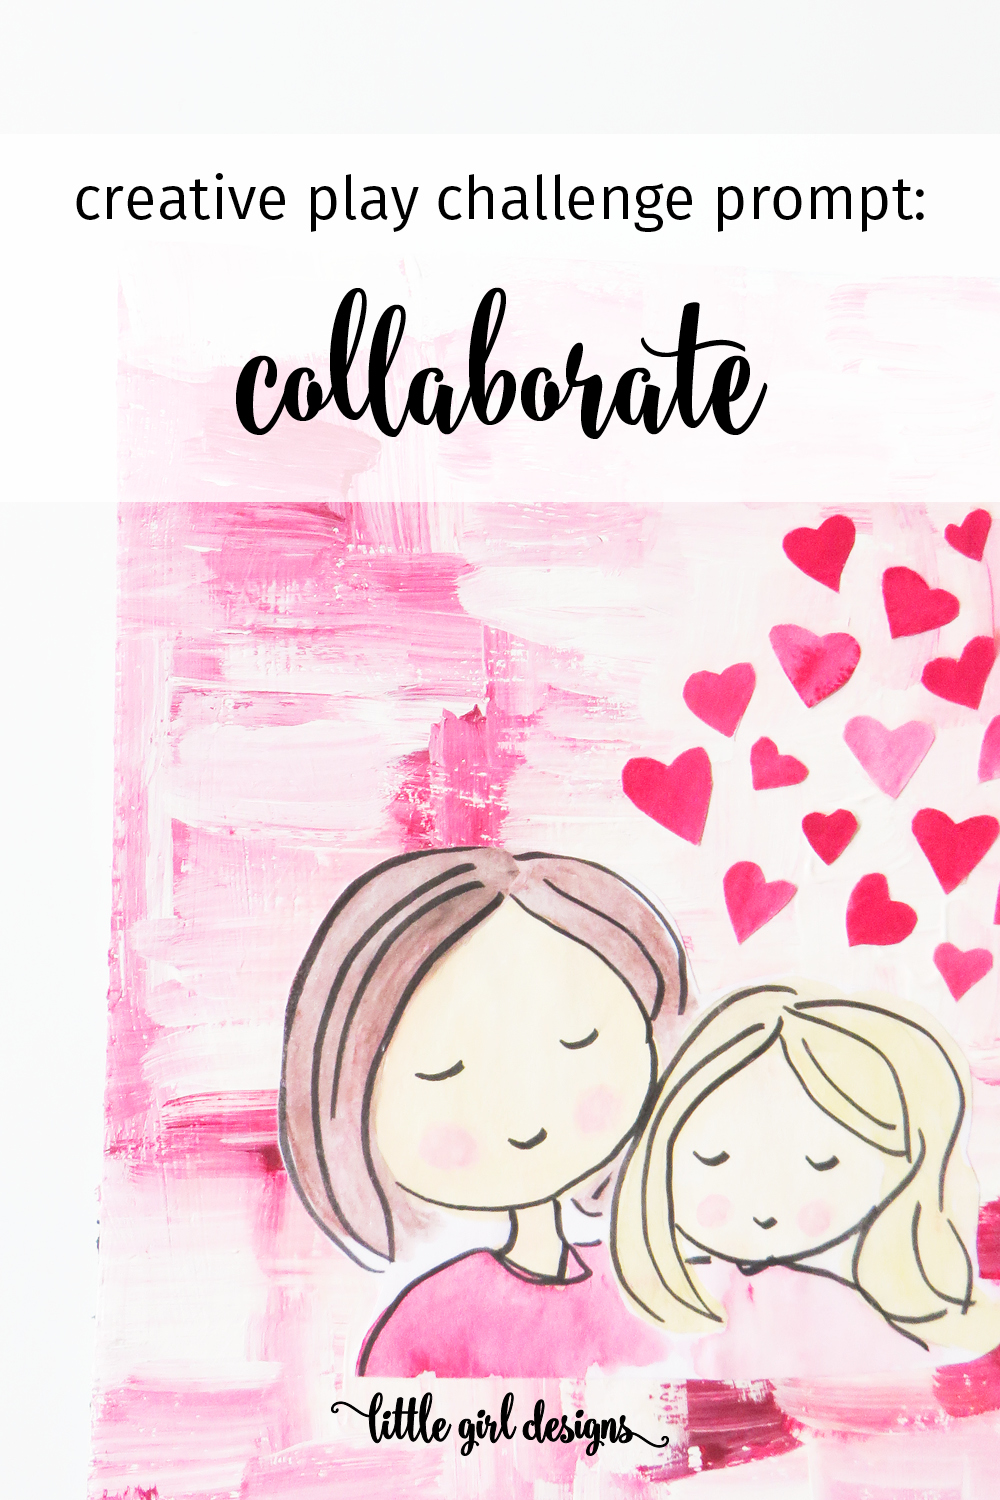 This week's prompt in the FREE creative play challenge is to collaborate with a friend. Here are some tips on how to make collaboration fun for both of you!